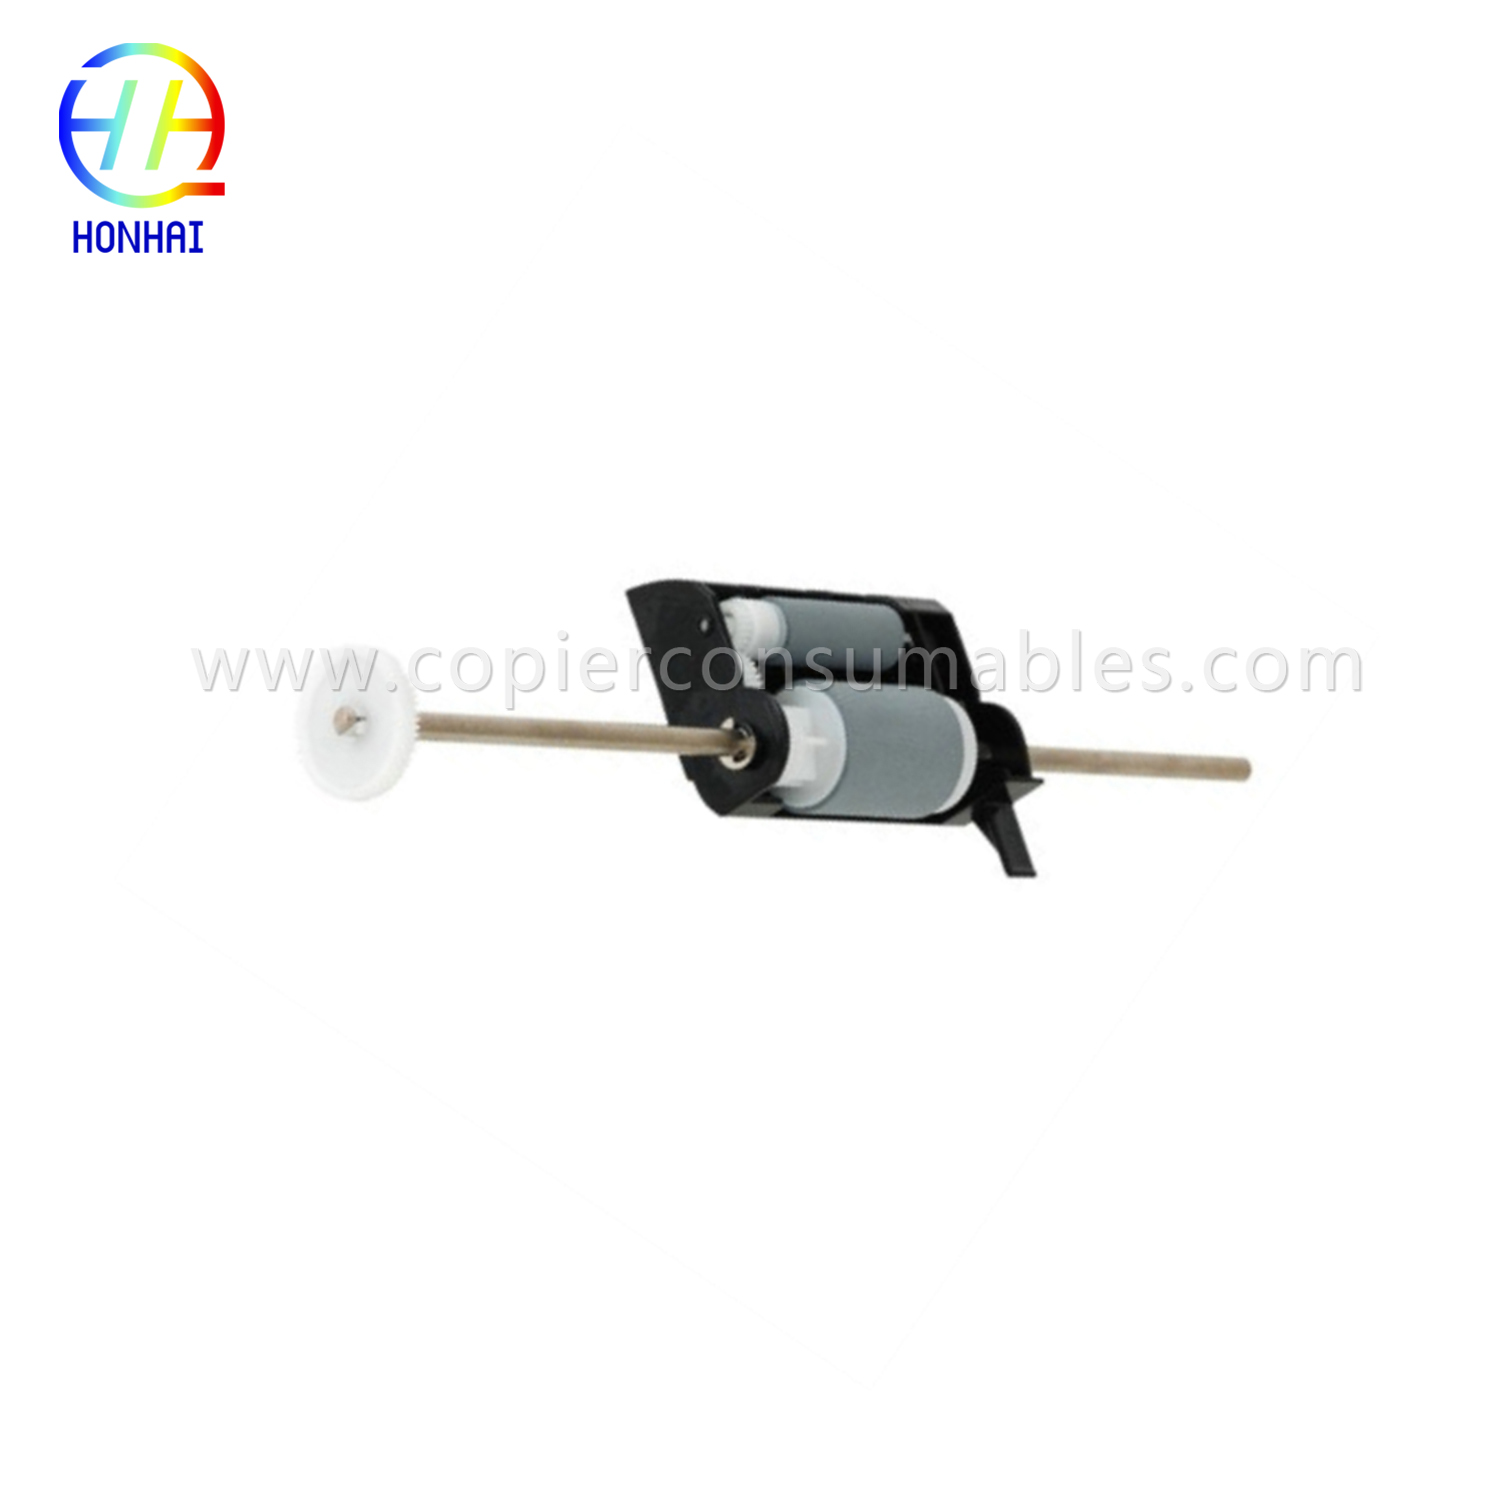 I-Document Separation Roller Assembly for Brother MFC-8710dw 8515 8910 8520 8510 8600 8900 8950 8370 DCP8150dn Lx9098001